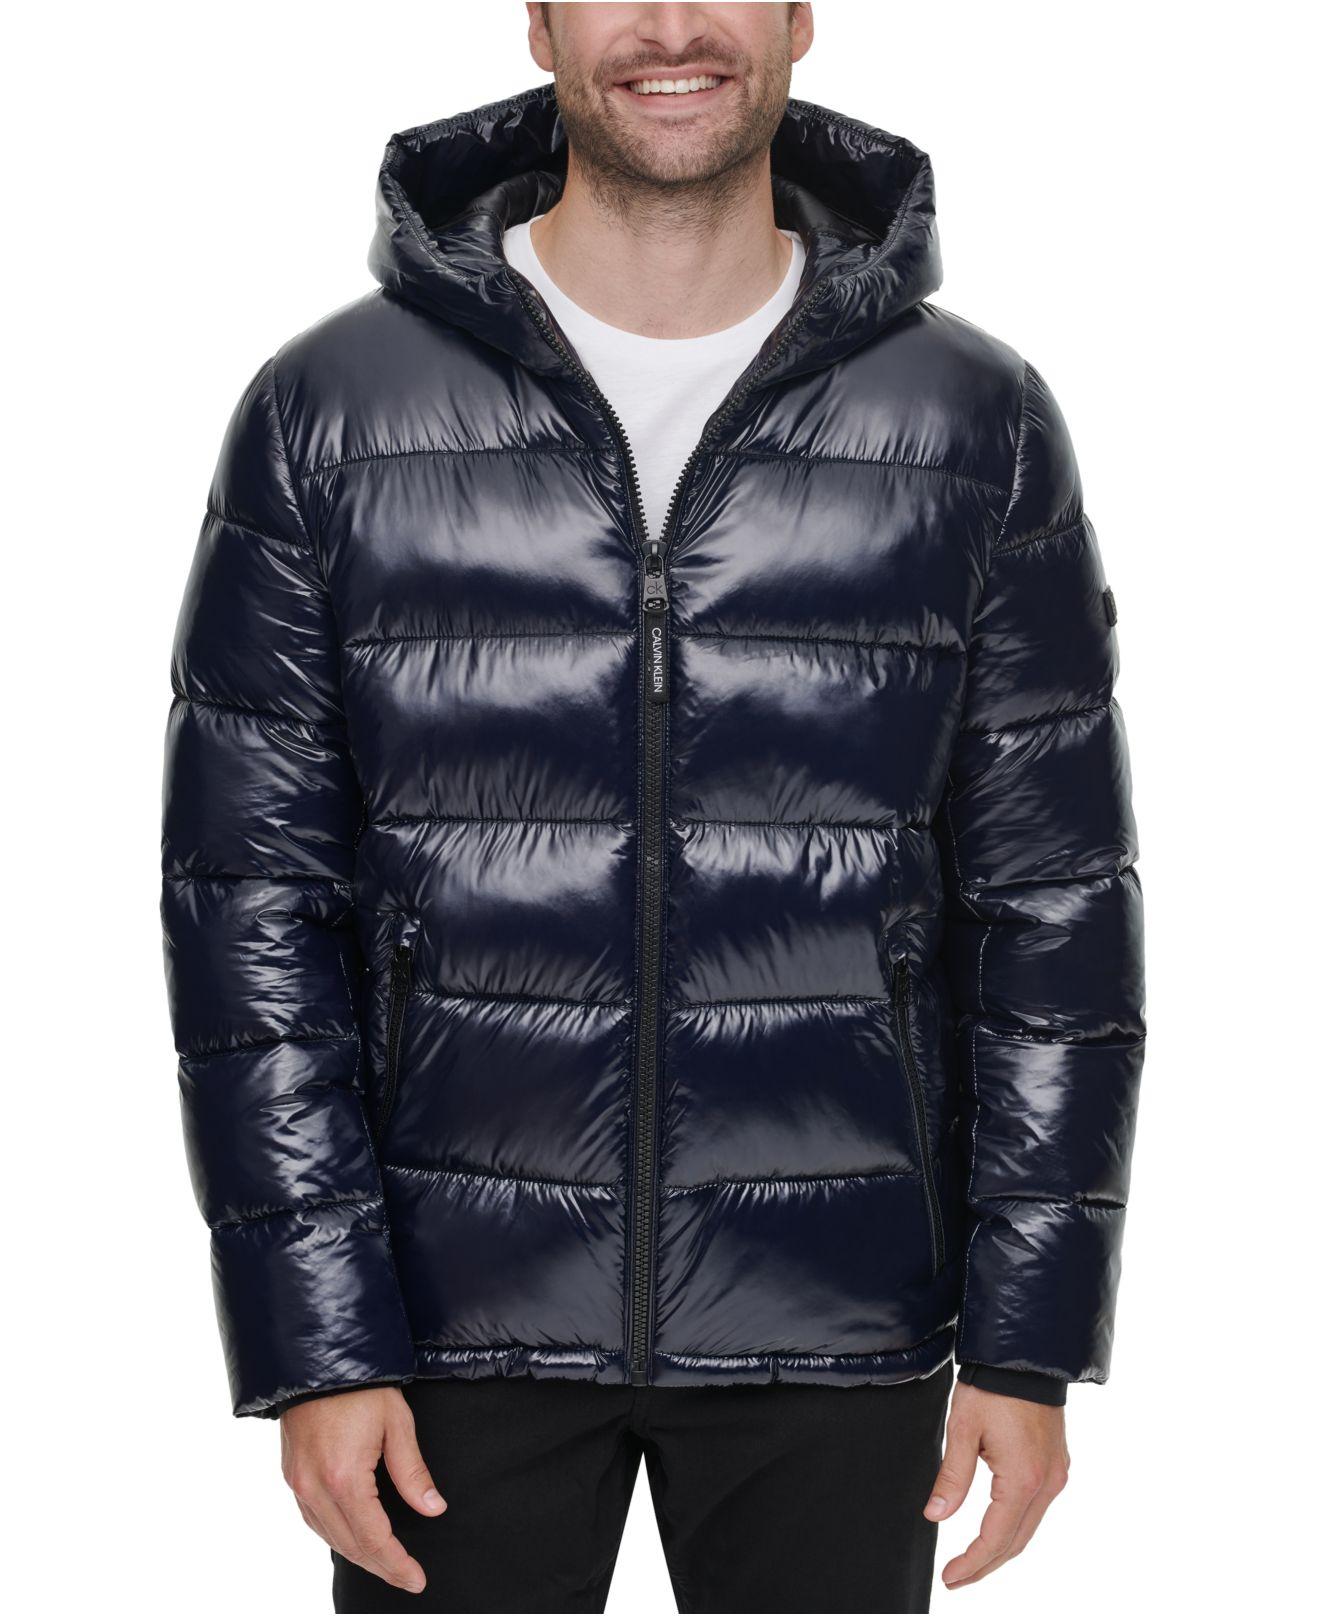 Calvin Klein Synthetic High Shine Puffer Jacket in Blue for Men - Lyst